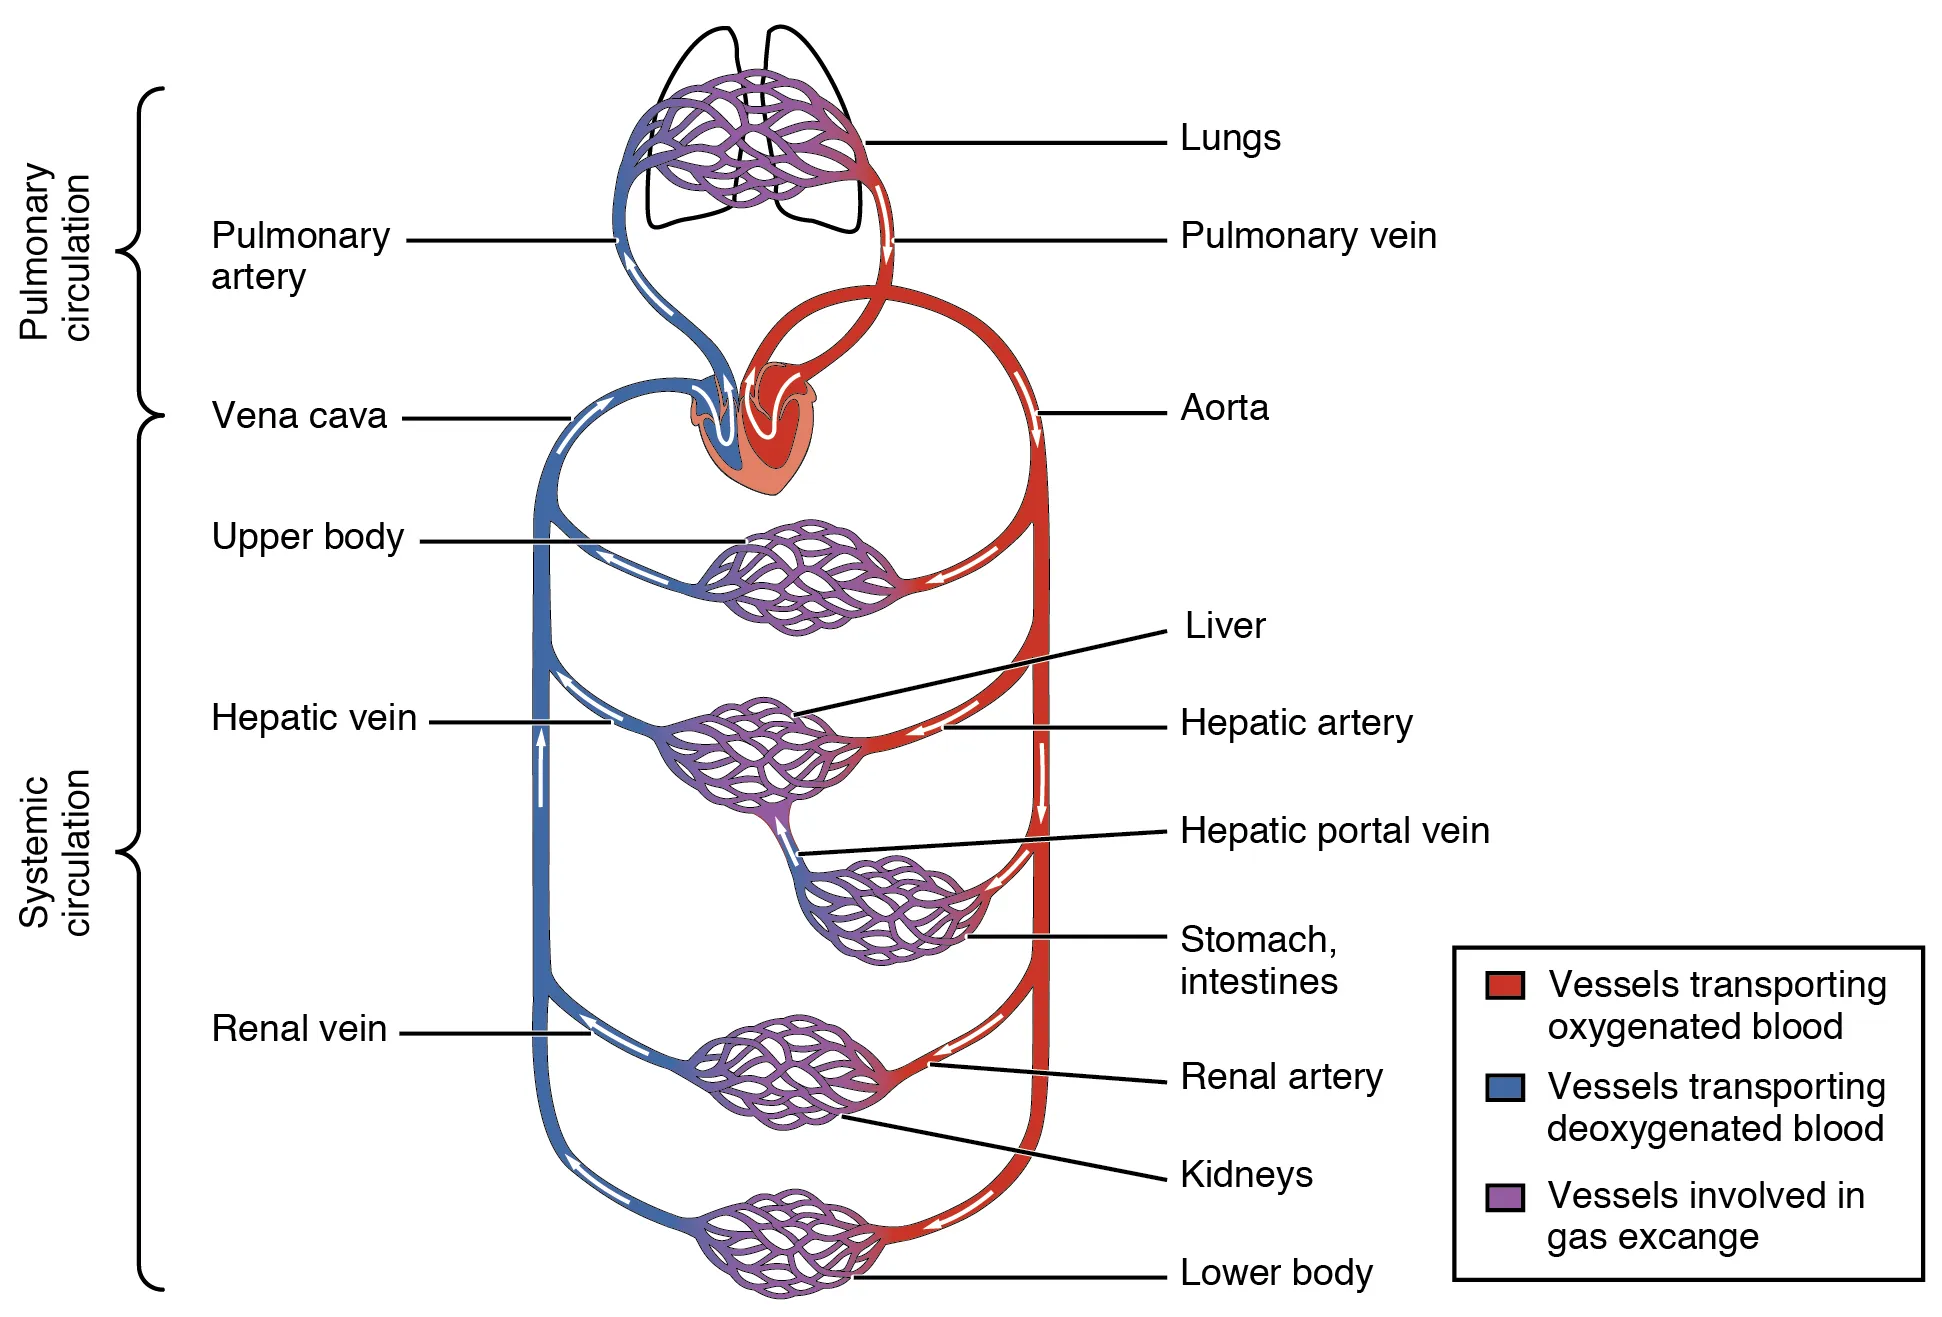 This diagram shows how oxygenated and deoxygenated blood flow through the major organs in the body.